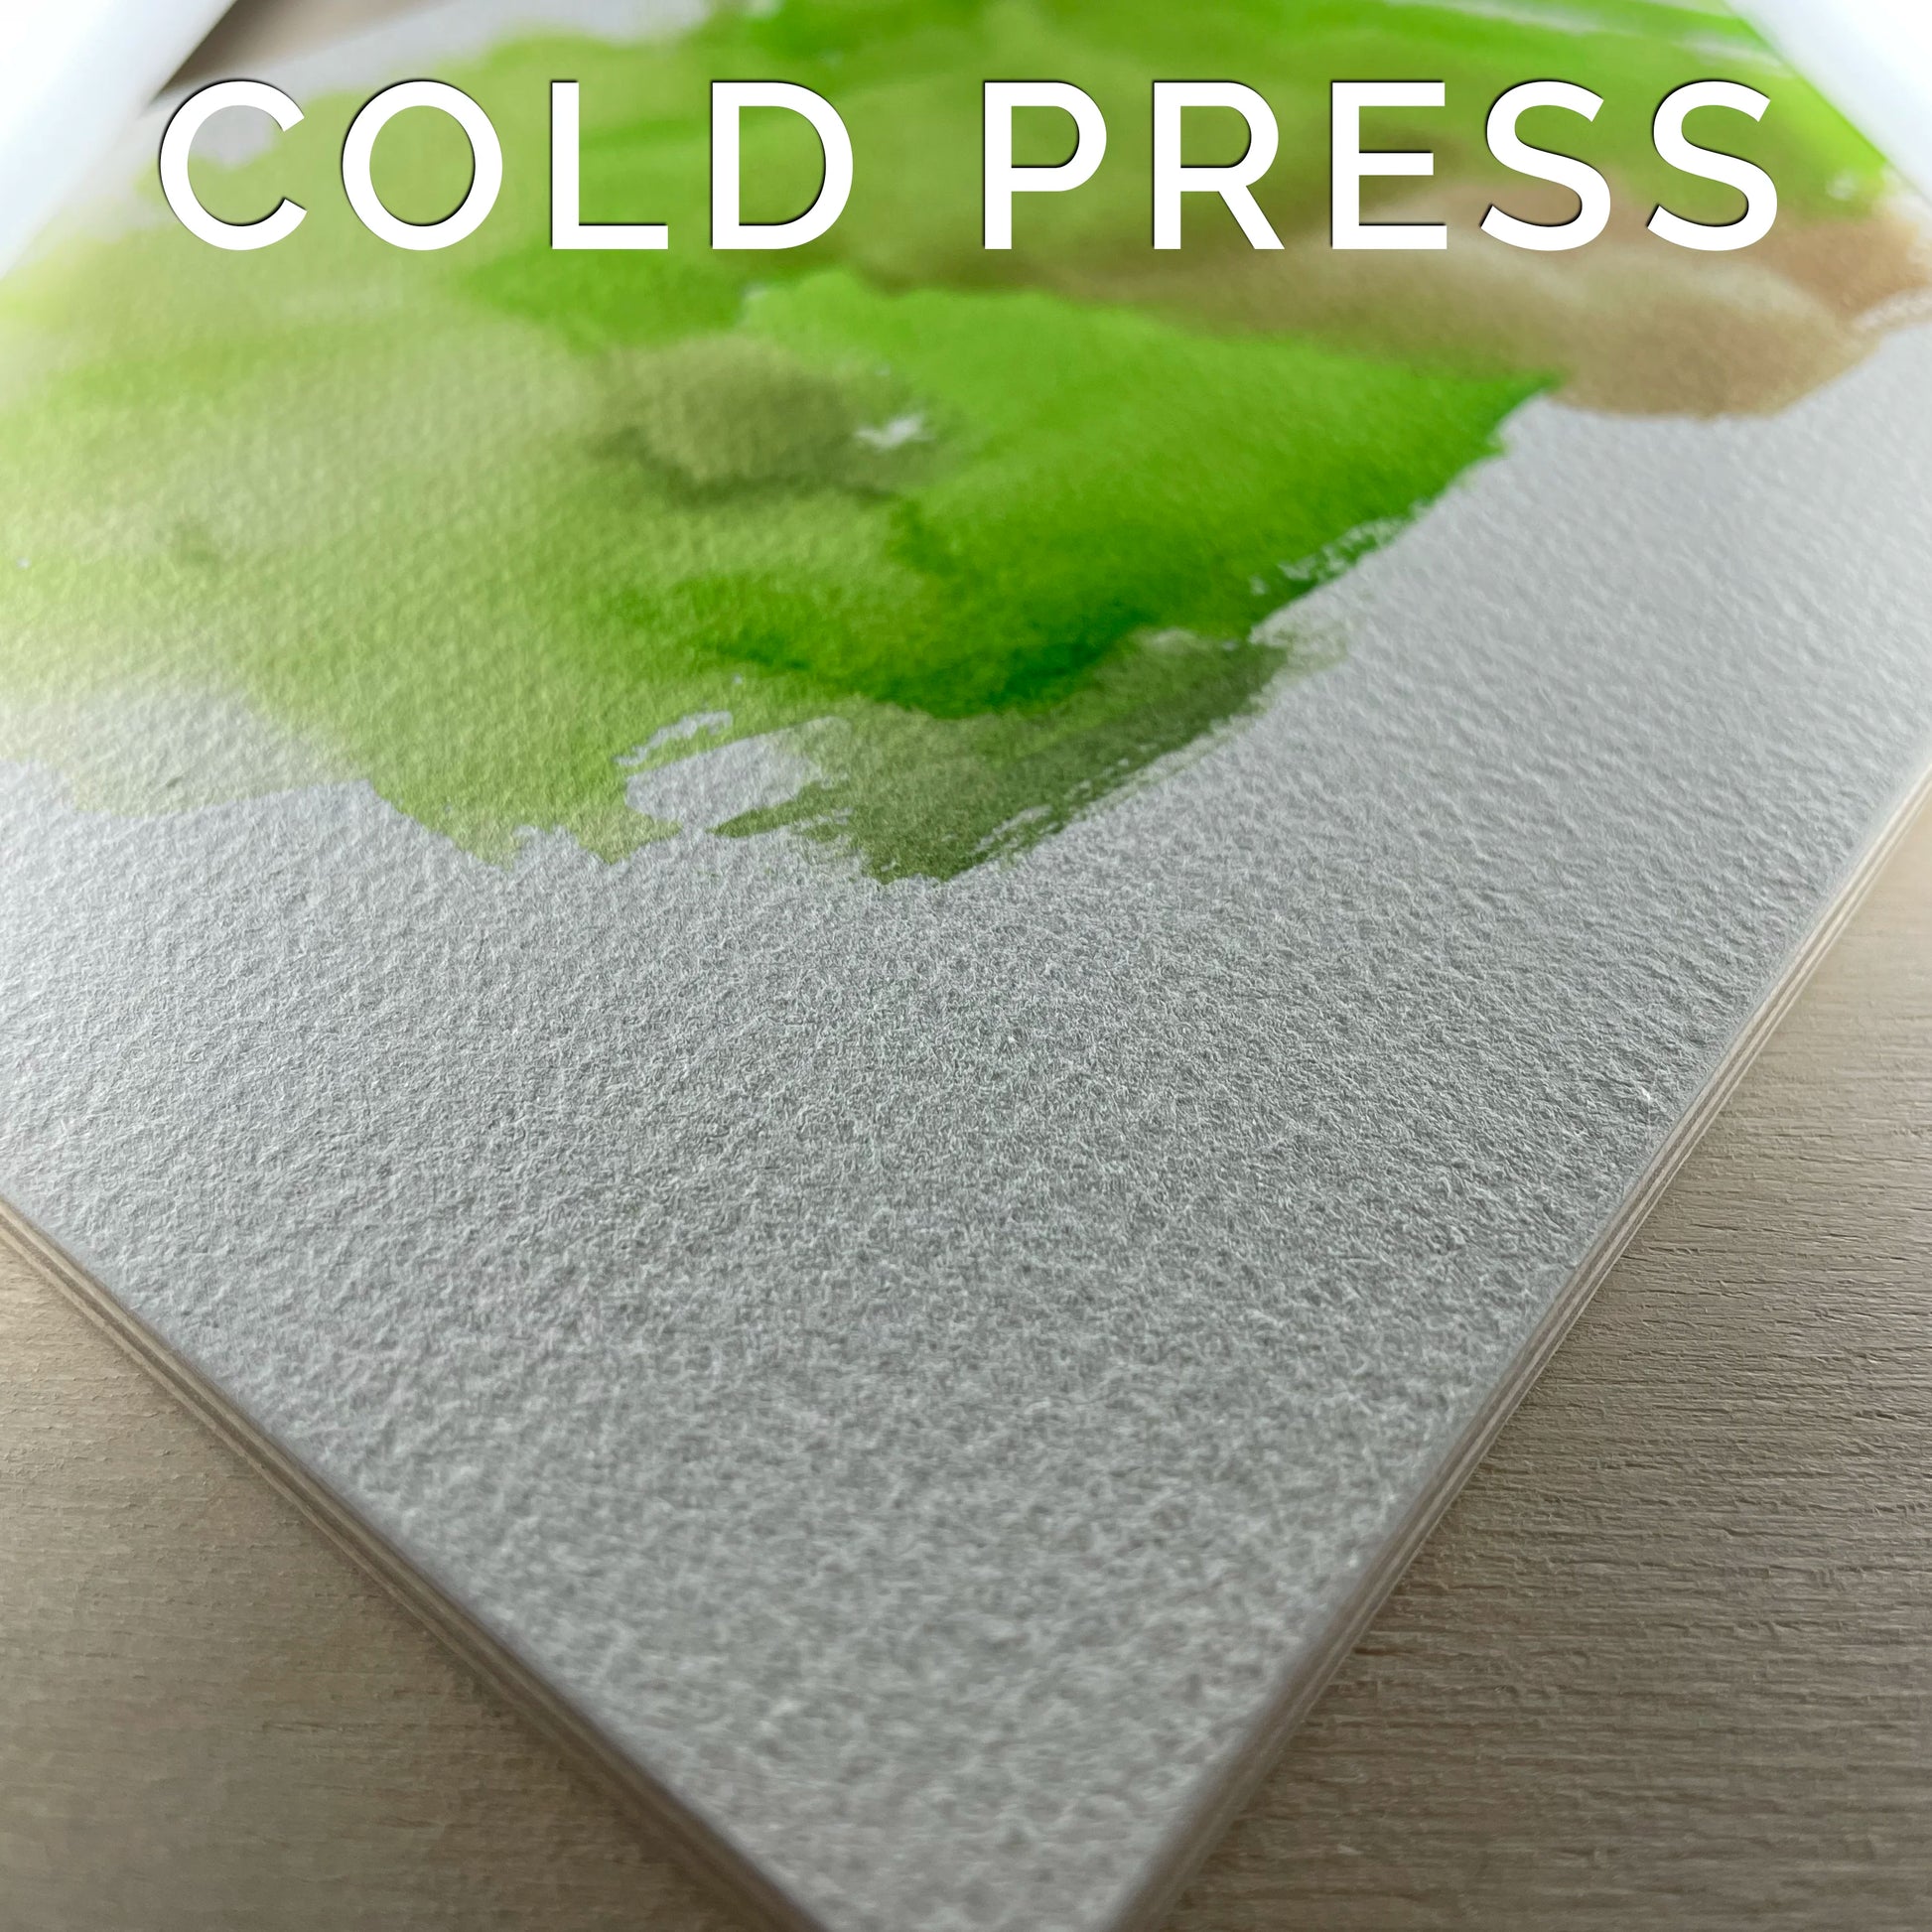 Watercolor Painting Panel | Watercolor Canvas | Trekell Art Supplies Cold Press / 6 x 8